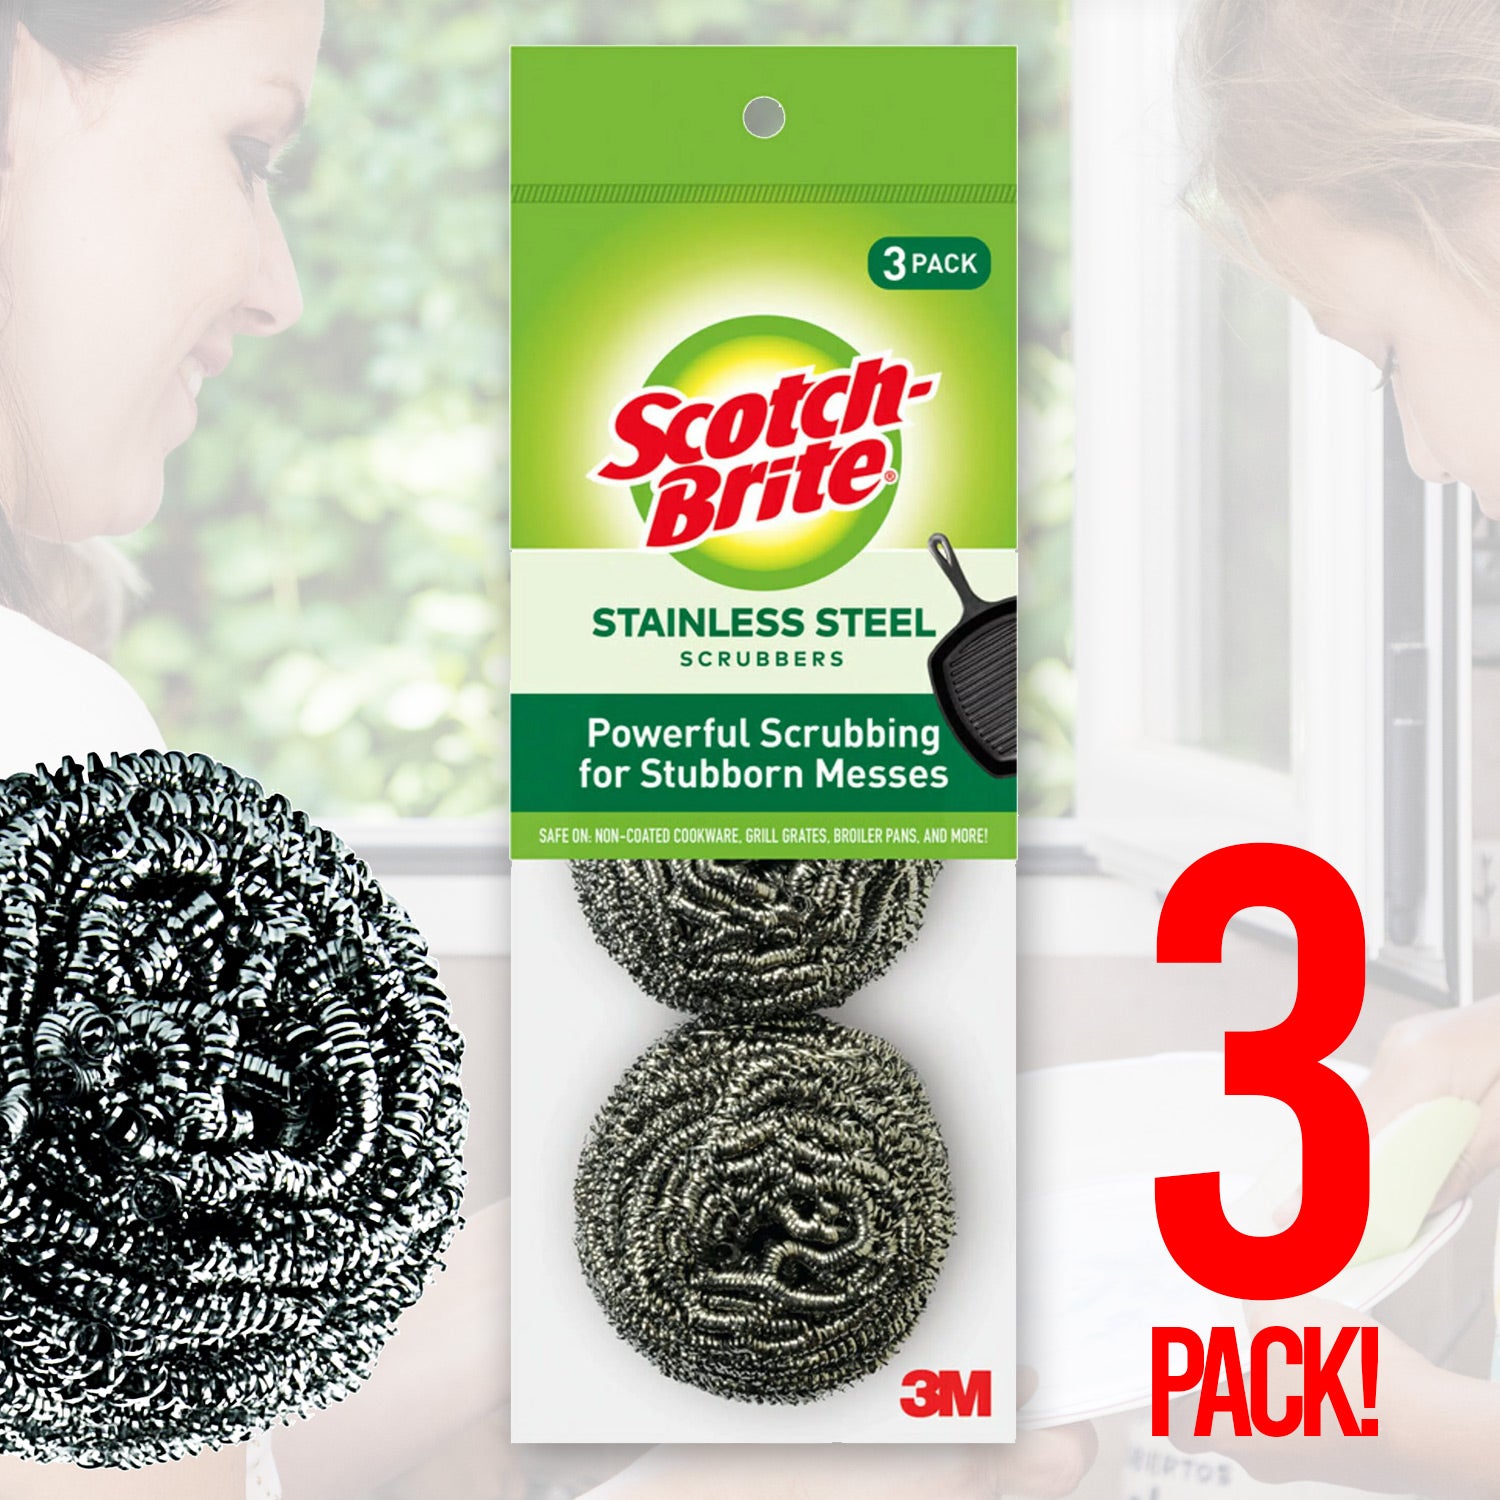 Scrub Time Stainless Steel Dish Scourers, 4 Pack, 20g